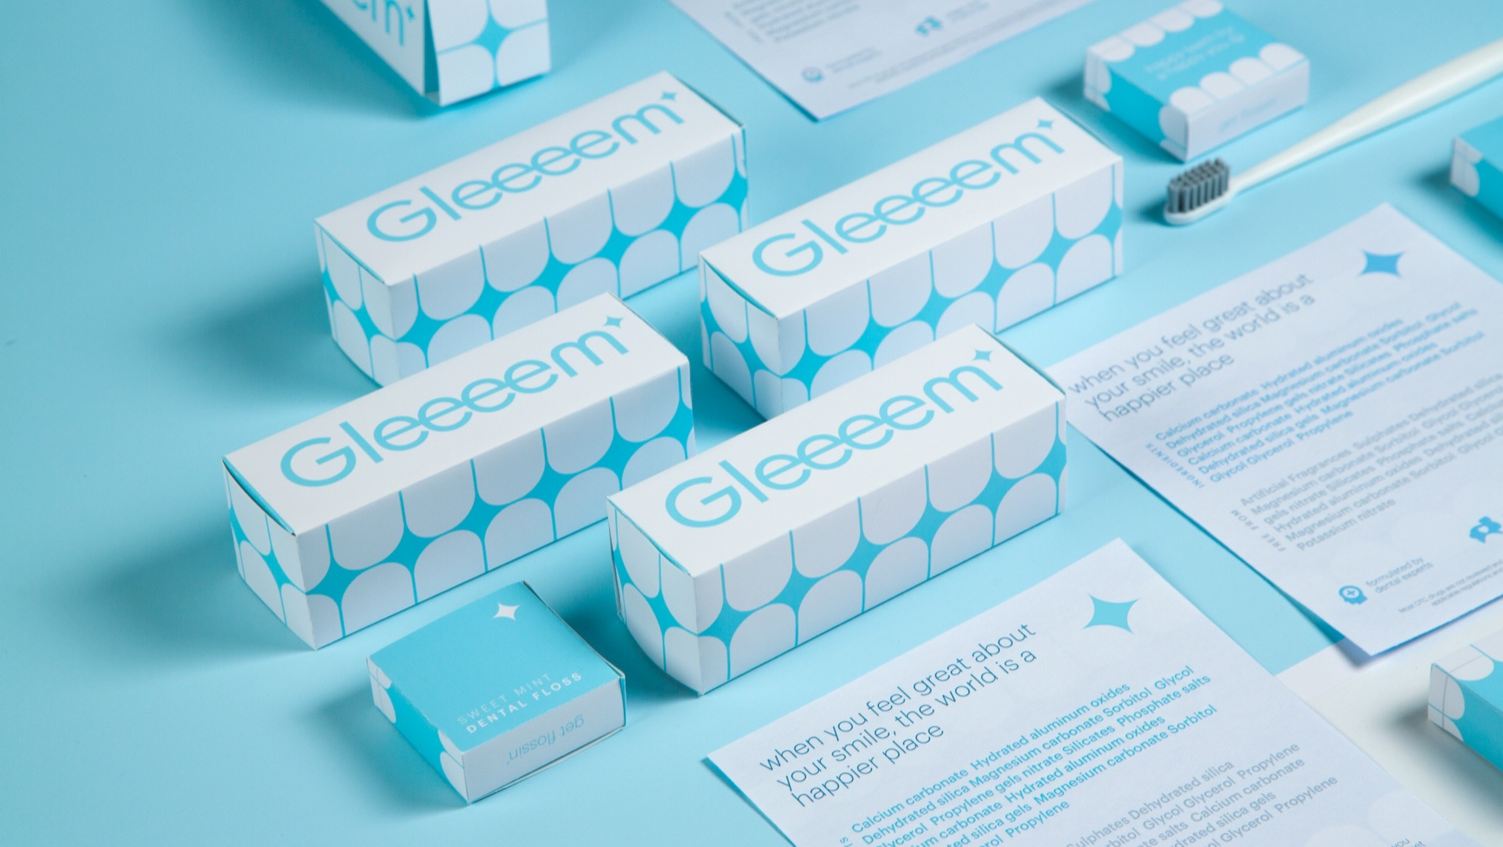 Student Week: Gleeem Toothpaste Takes A Whimsical Approach In The Previously Sterile Dental Space